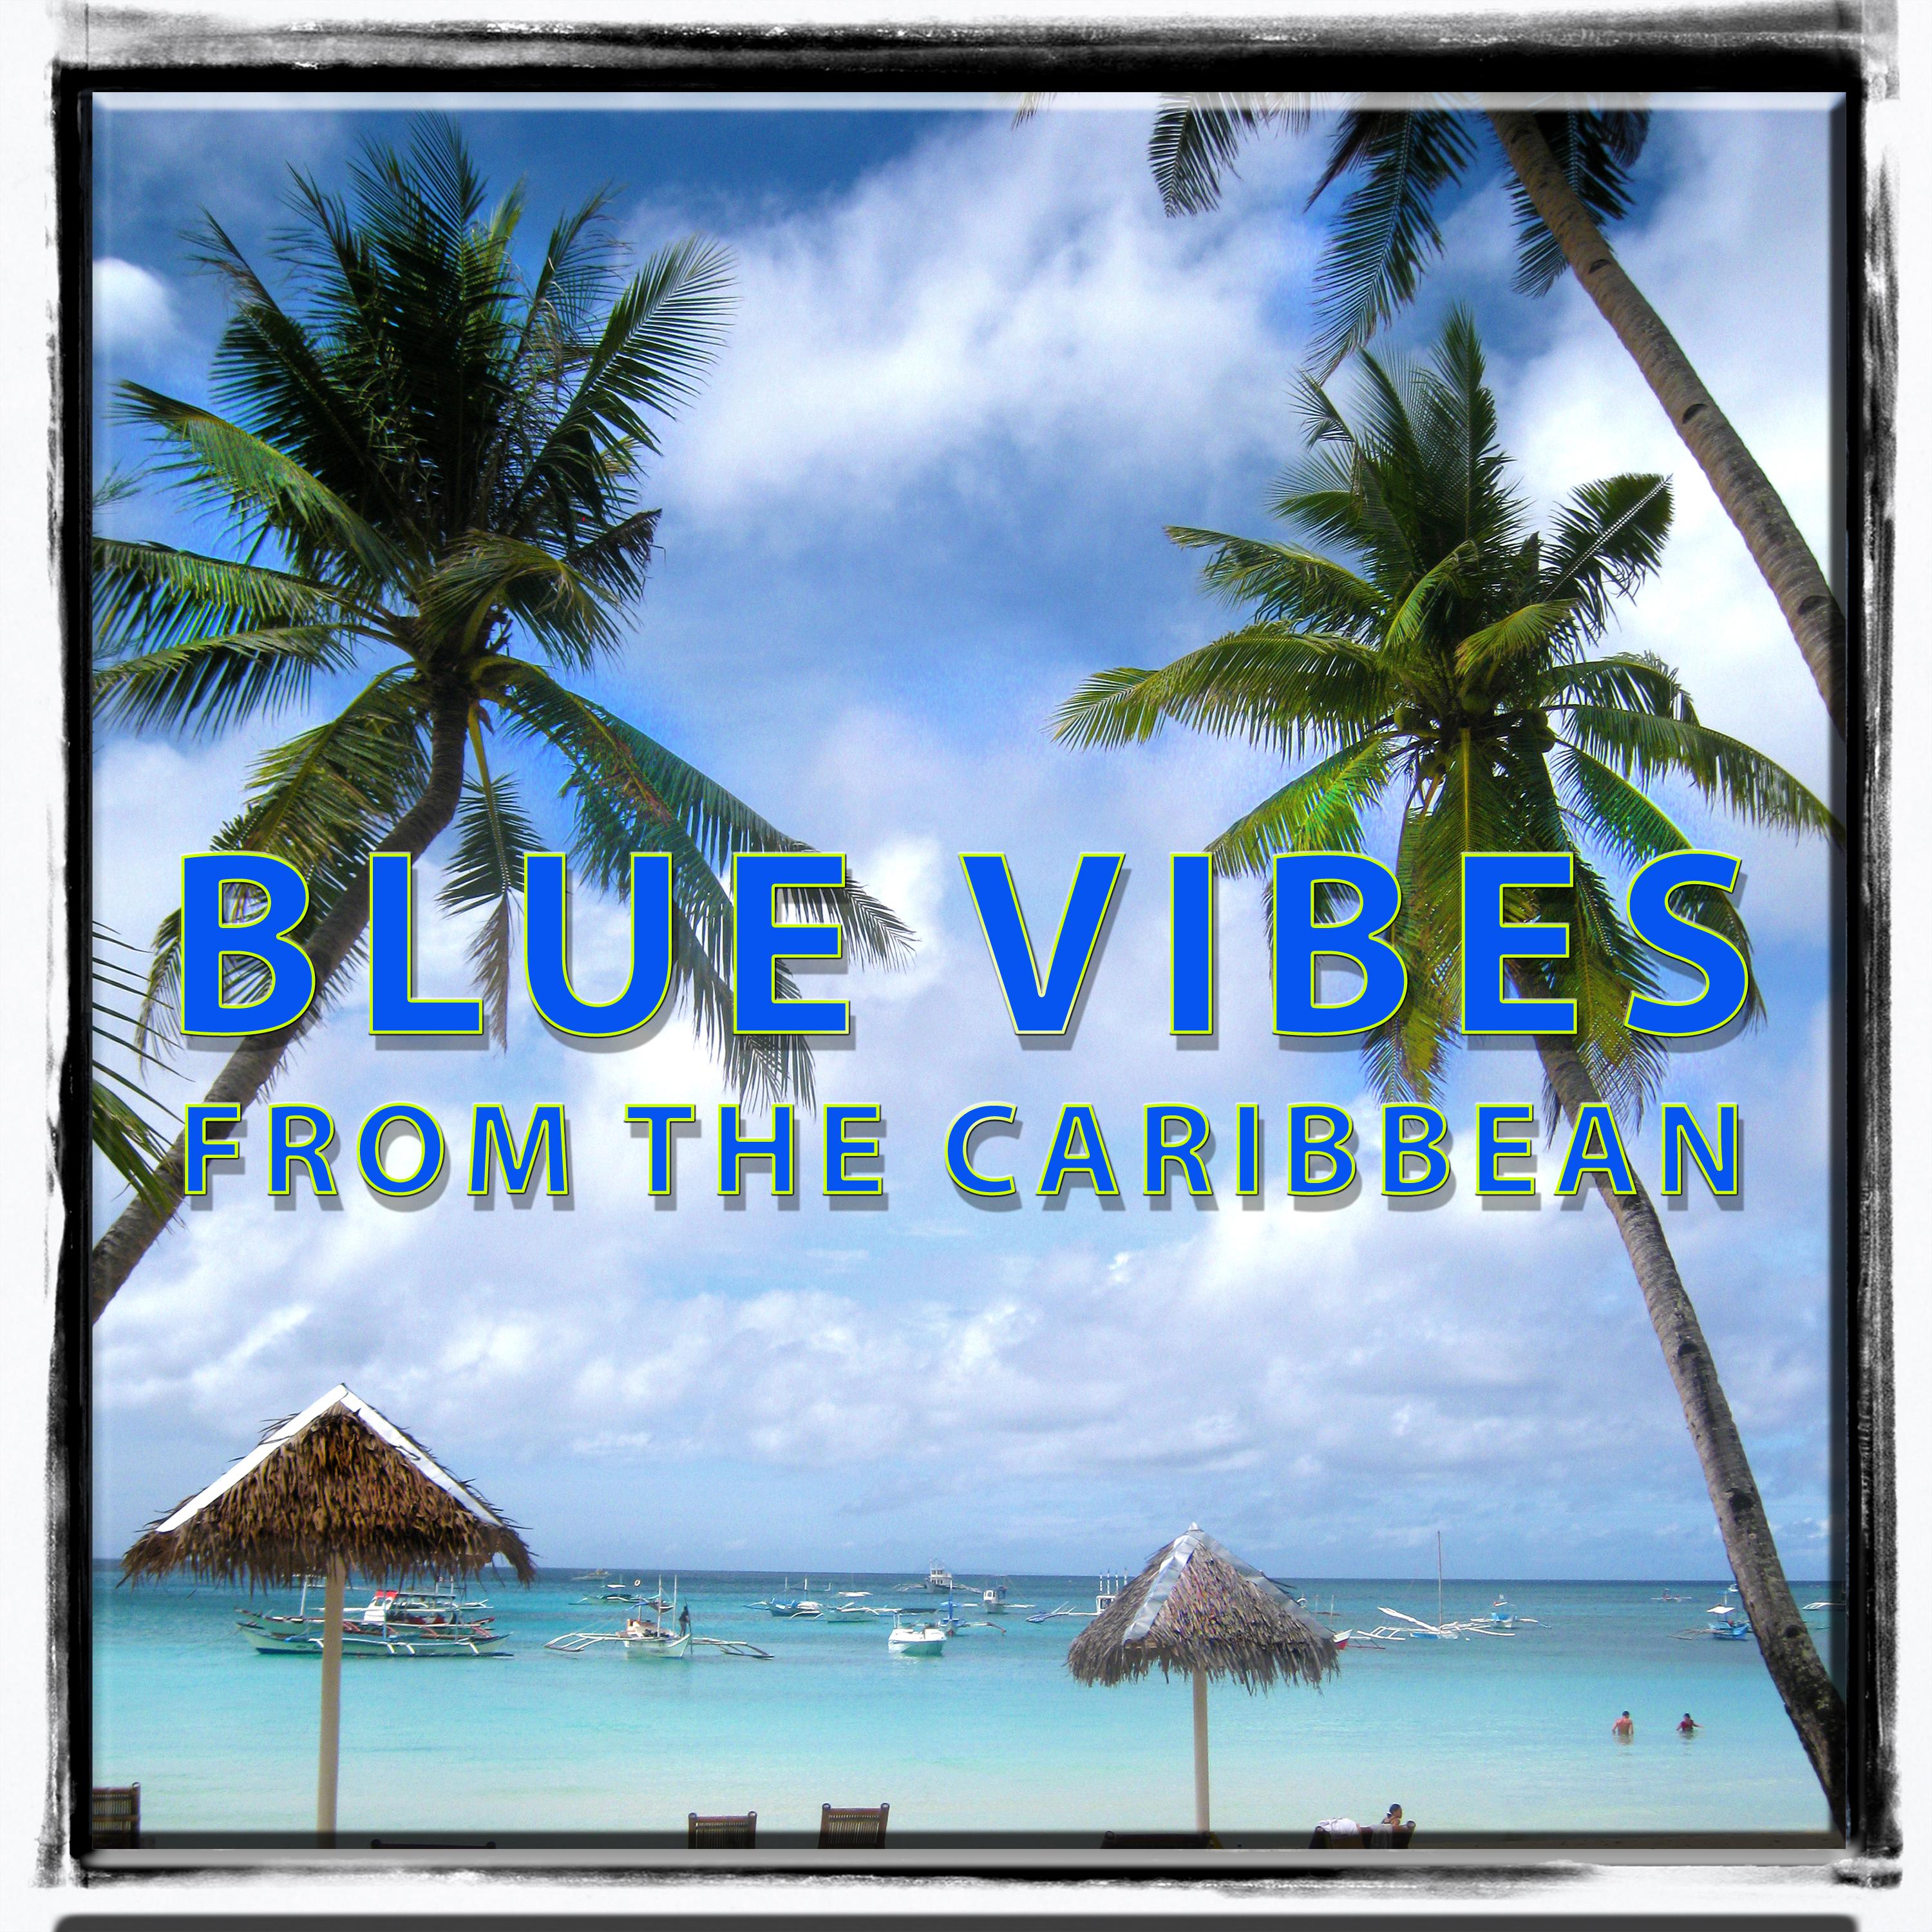 Blue vibes from the Caribbean